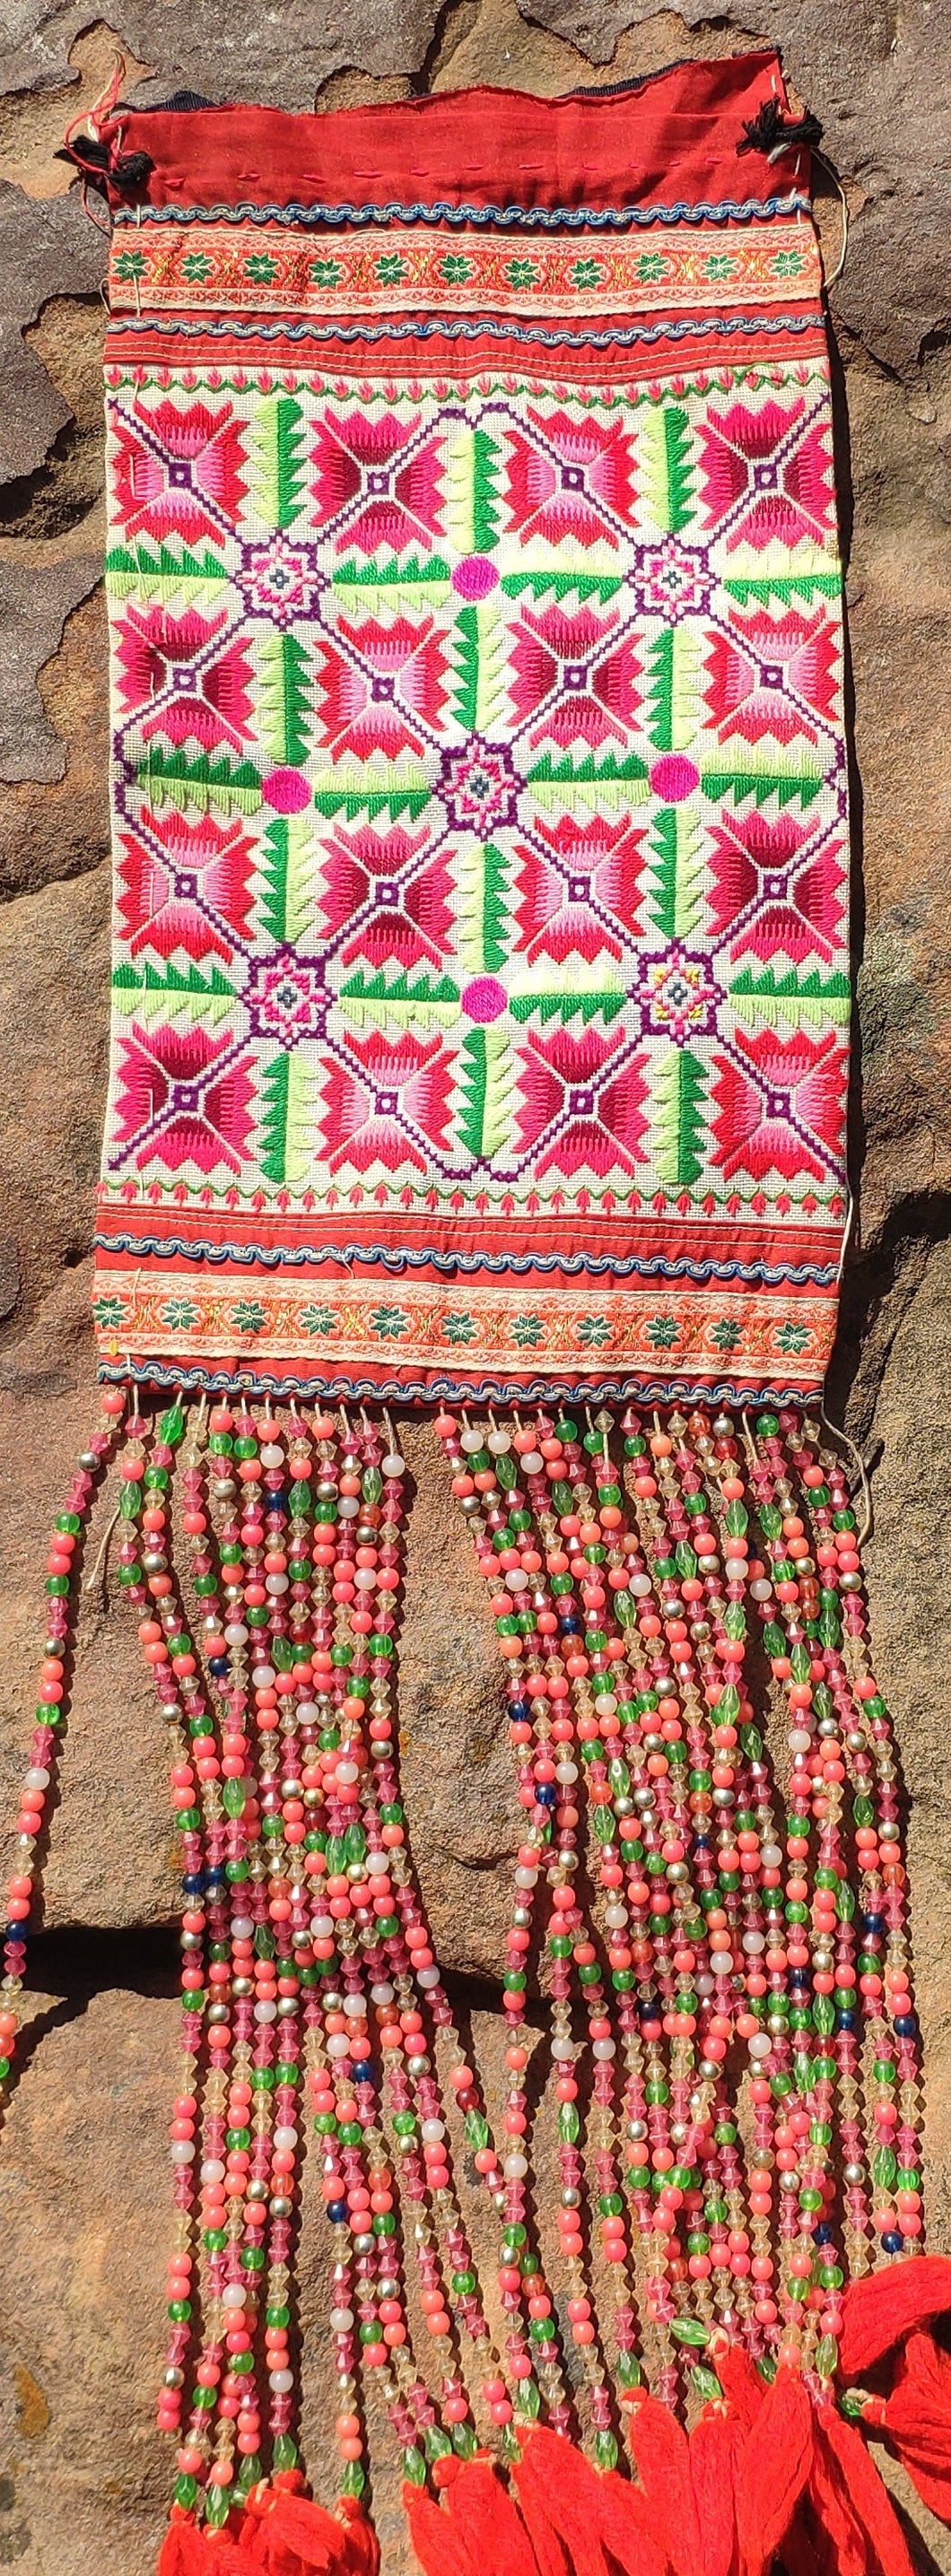 Hmong embroidered panels #8